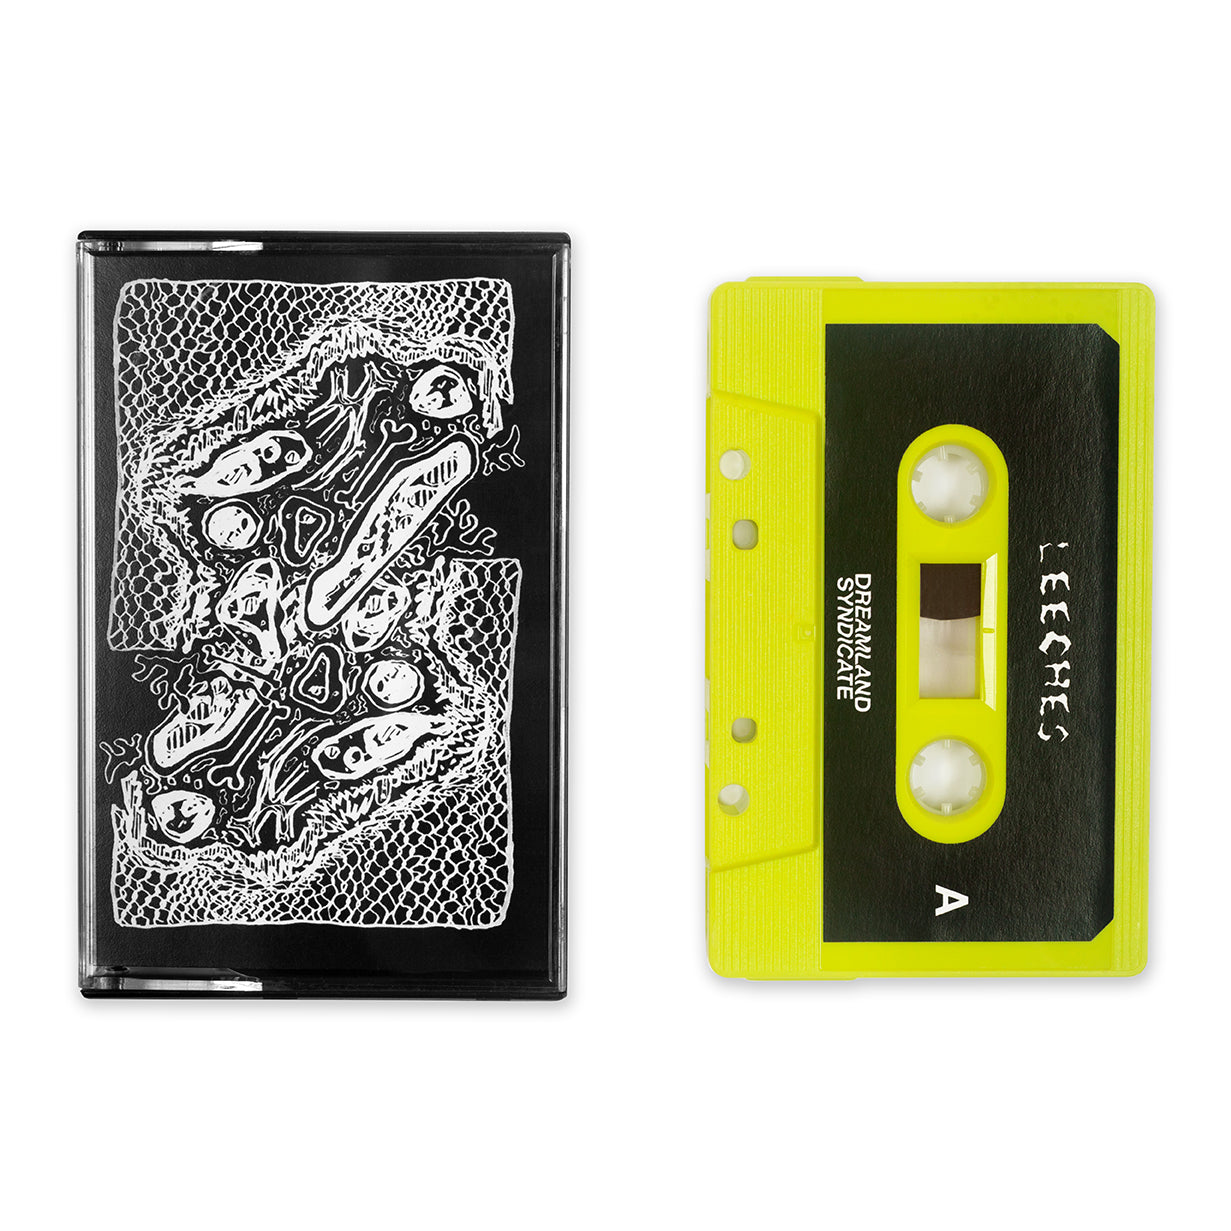 Leeches -Sour Earth Cassette Tape - Dreamland Syndicate